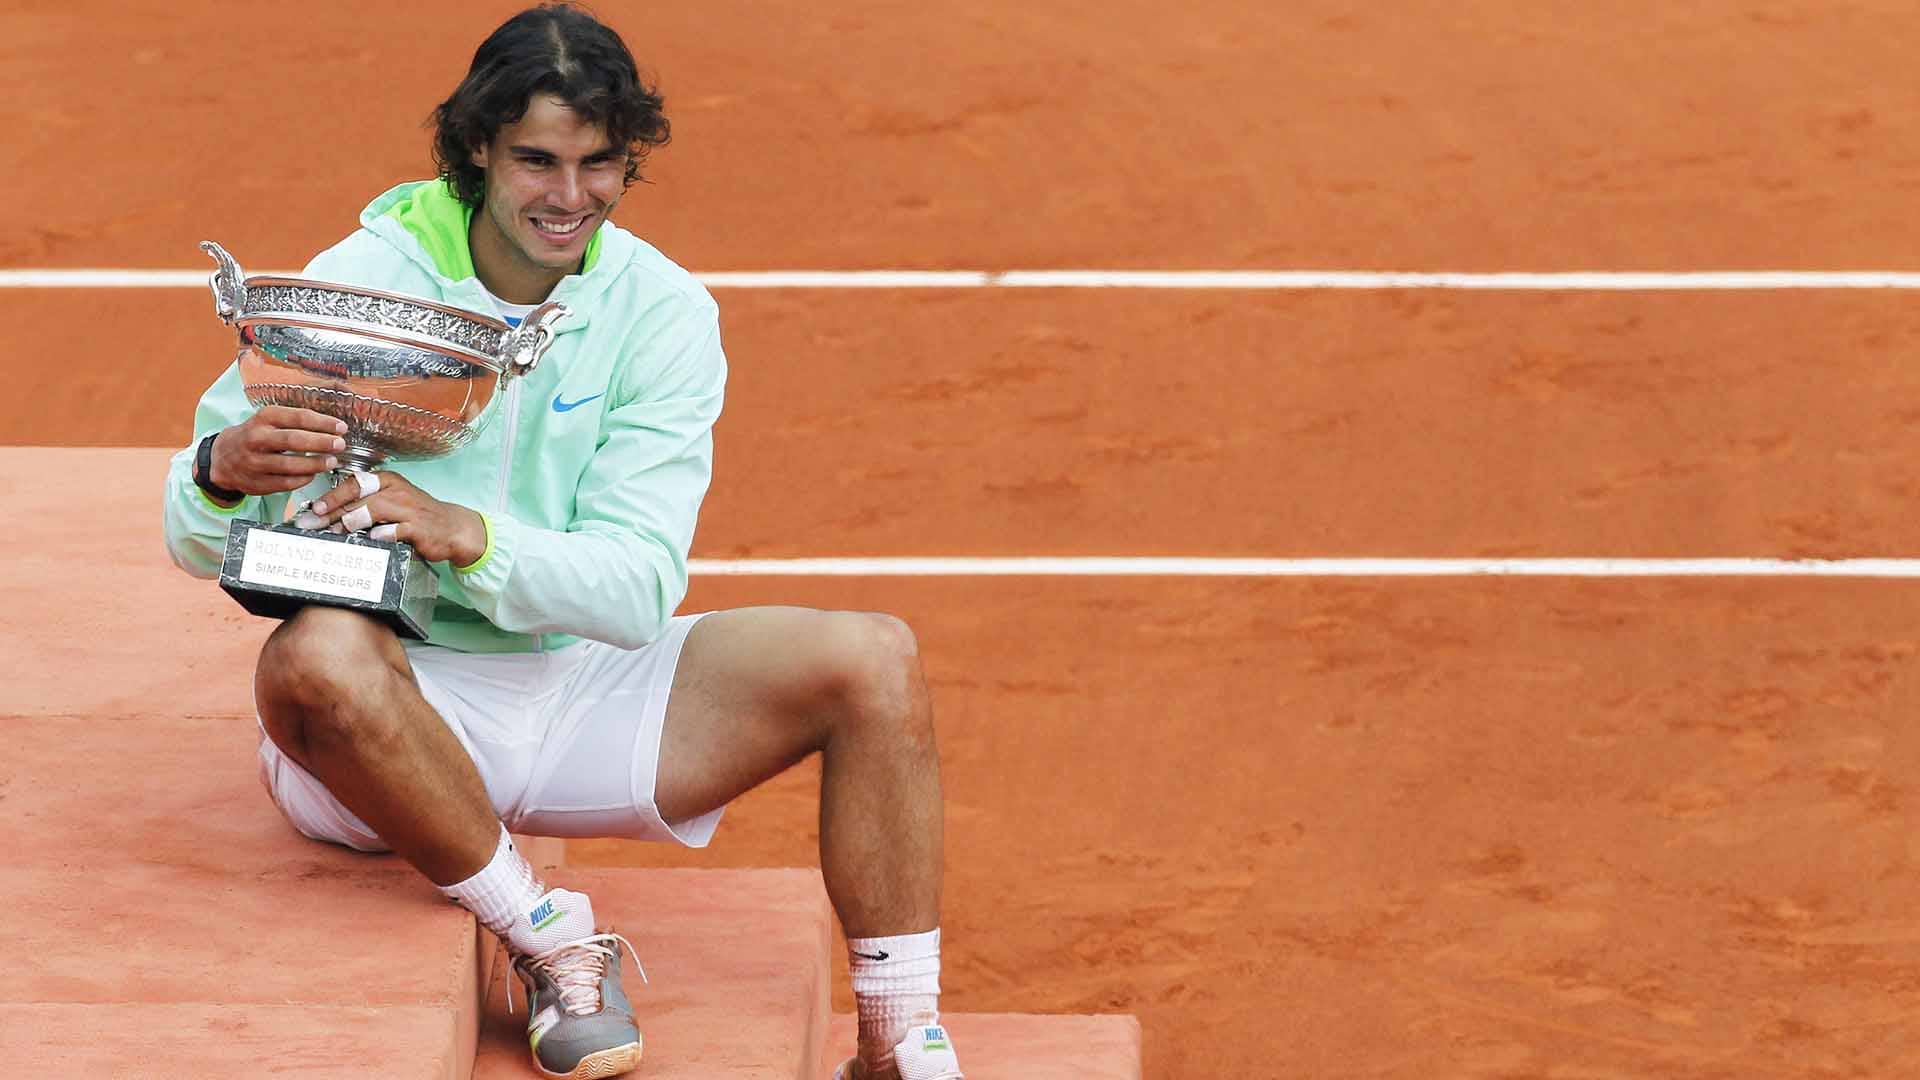 Rafael Nadal overcomes Robin Soderling 6-4, 6-2, 6-4 to win his fifth Roland Garros title in six years.